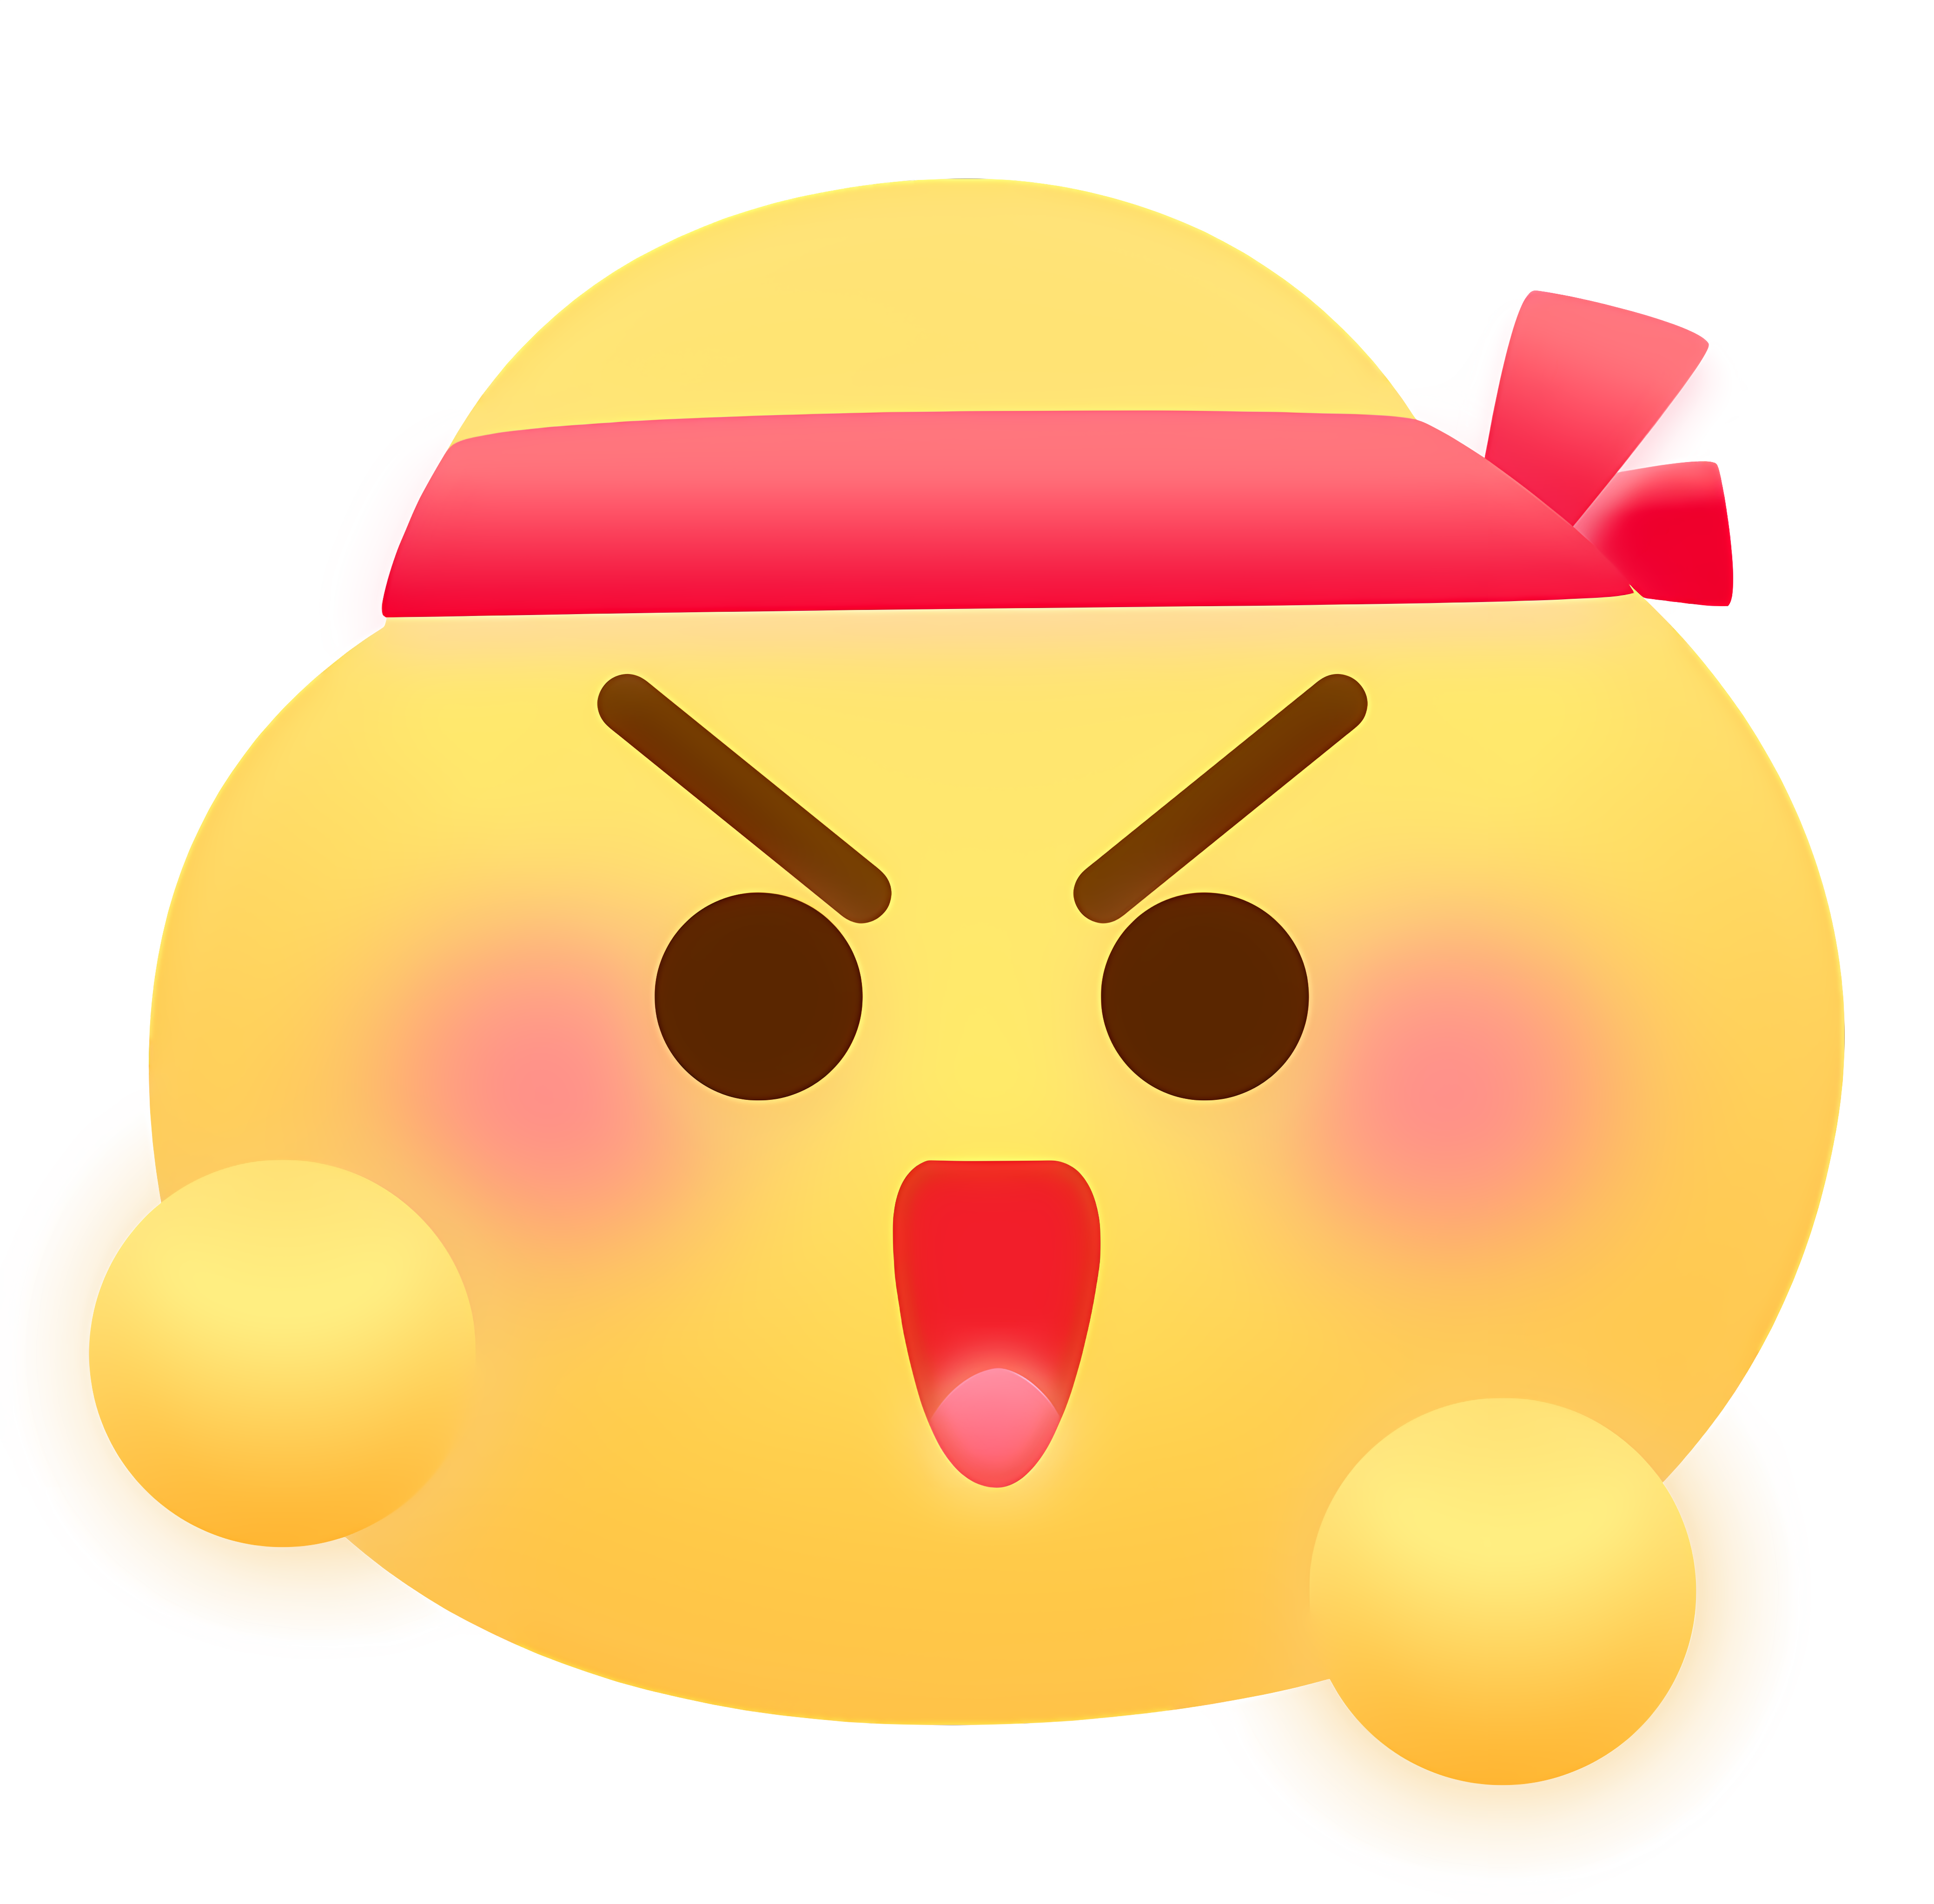 Angry emoji with pouting face and bow Clipart